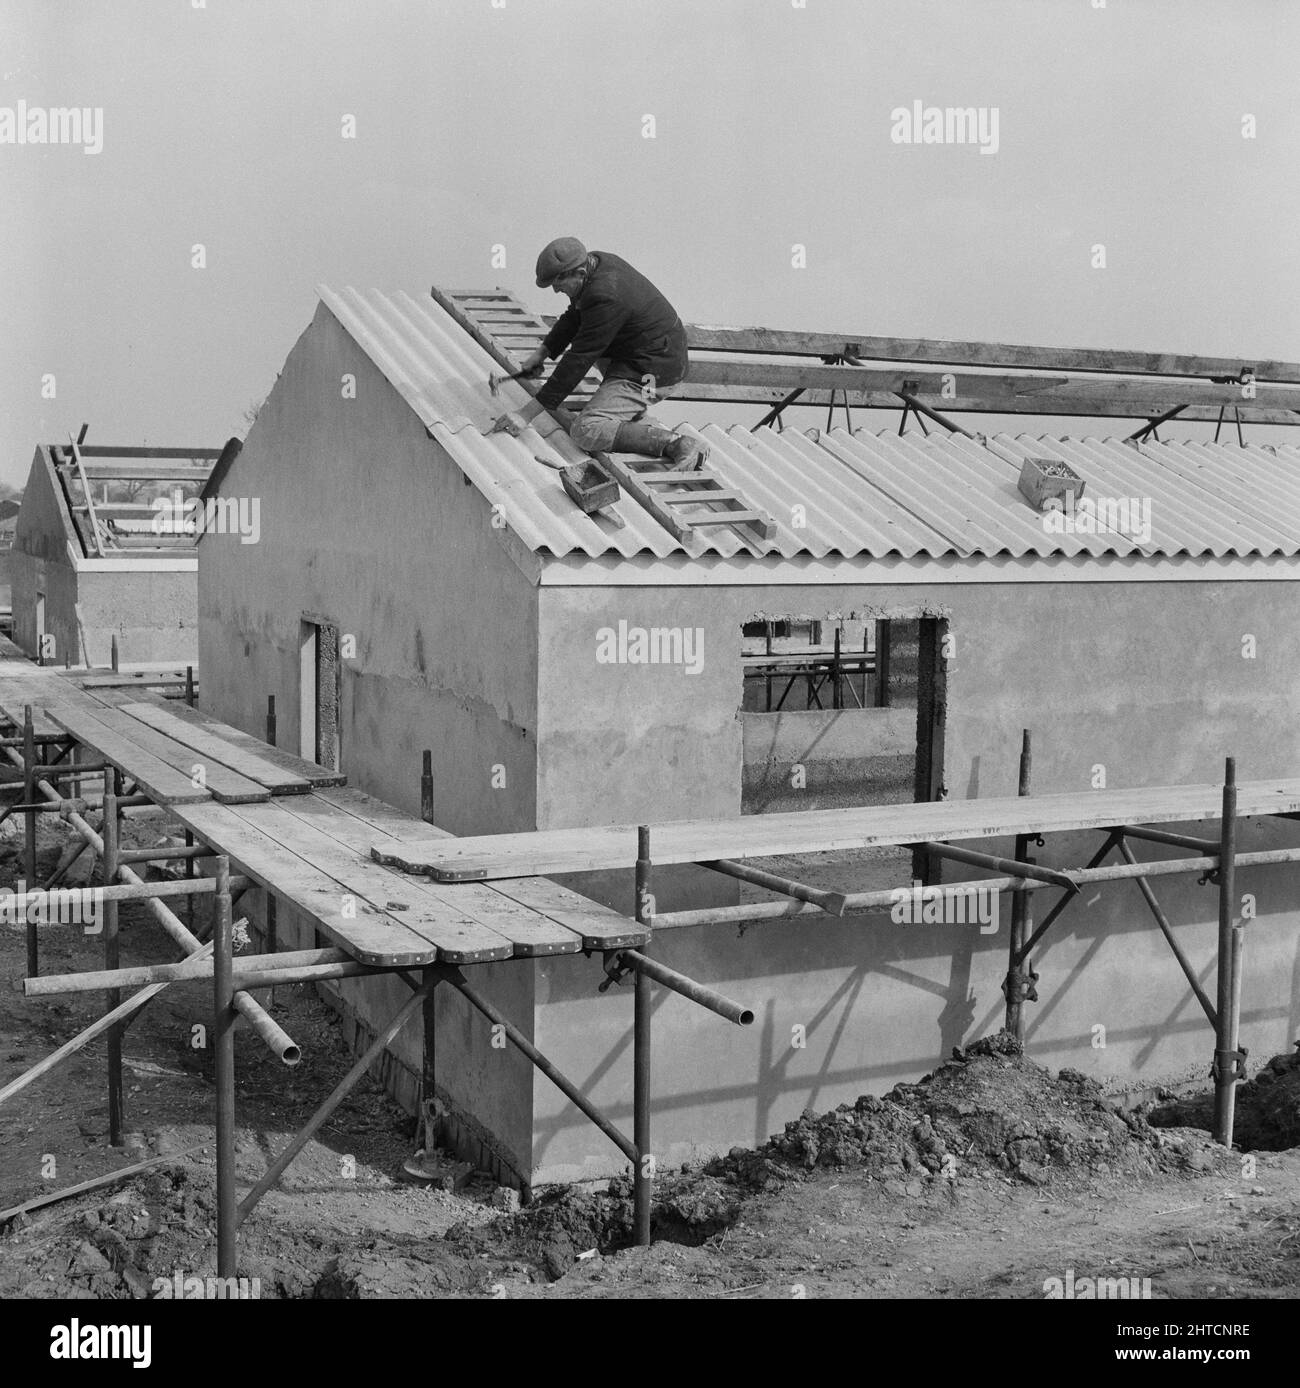 RAF Gaydon, Gaydon, Stratford-on-Avon, Warwickshire, 11/03/1953. A man fitting corrugated roofing panels onto the roof of a newly constructed building at Gaydon Airfield. Work began on the construction of a new runway at Gaydon Airfield in early 1952. This was followed by a second contract for the construction of more than 100 Easiform and Air Ministry buildings, and 23 Nissen huts. Stock Photo